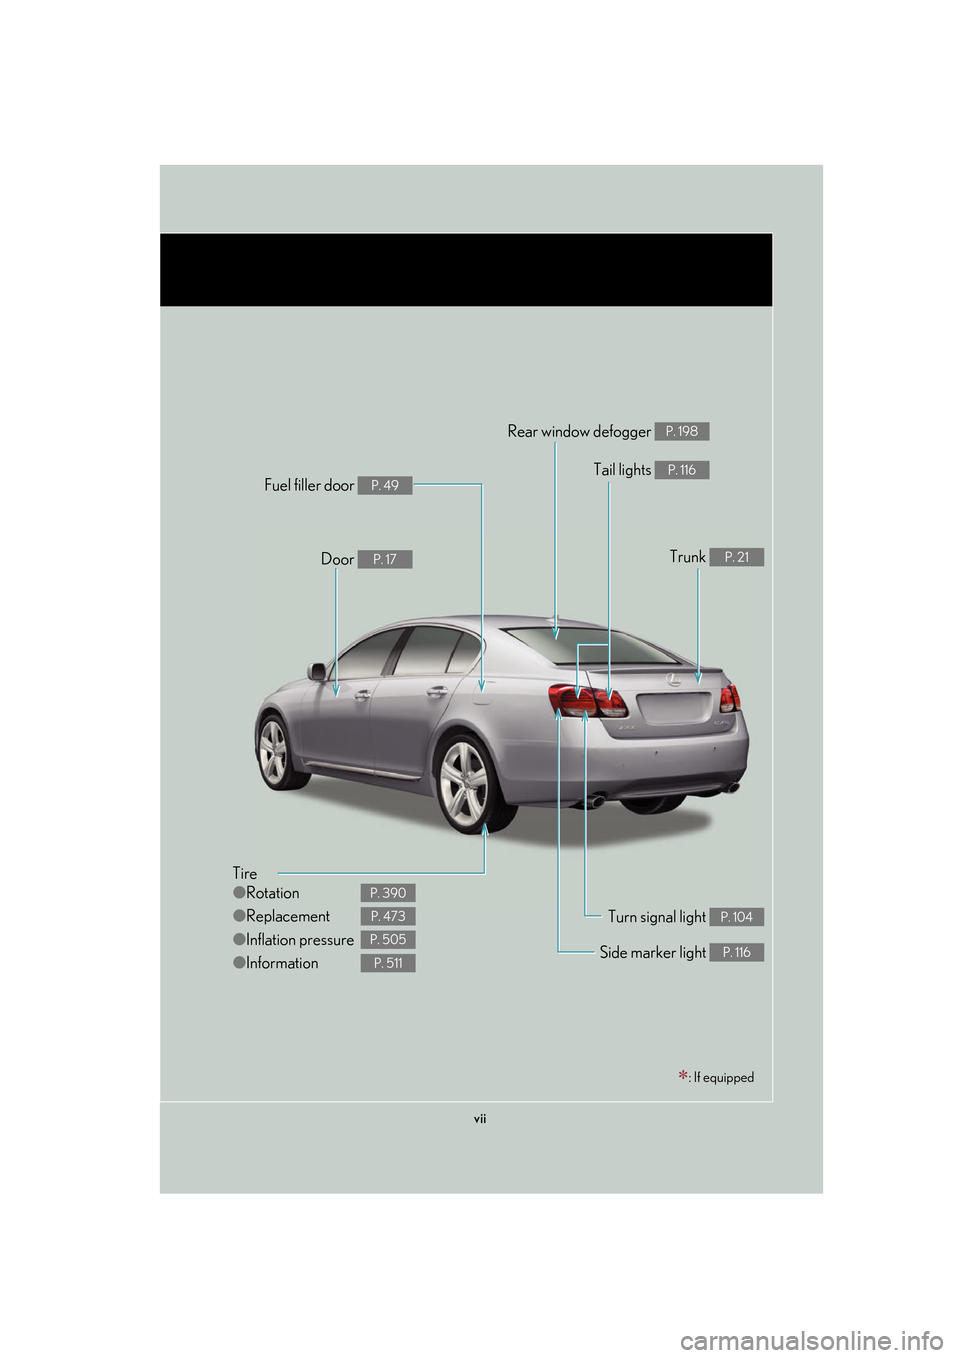 Lexus GS350 2007  Specifications / LEXUS 2007 GS430/350 OWNERS MANUAL (OM30A04U) vii
Tire
●Rotation
● Replacement
● Inflation pressure
● Information
P. 390
P. 473
P. 505
P. 511
Tail lights P. 116
Side marker light P. 116
Trunk P. 21
Rear window defogger P. 198
Door P. 17
F